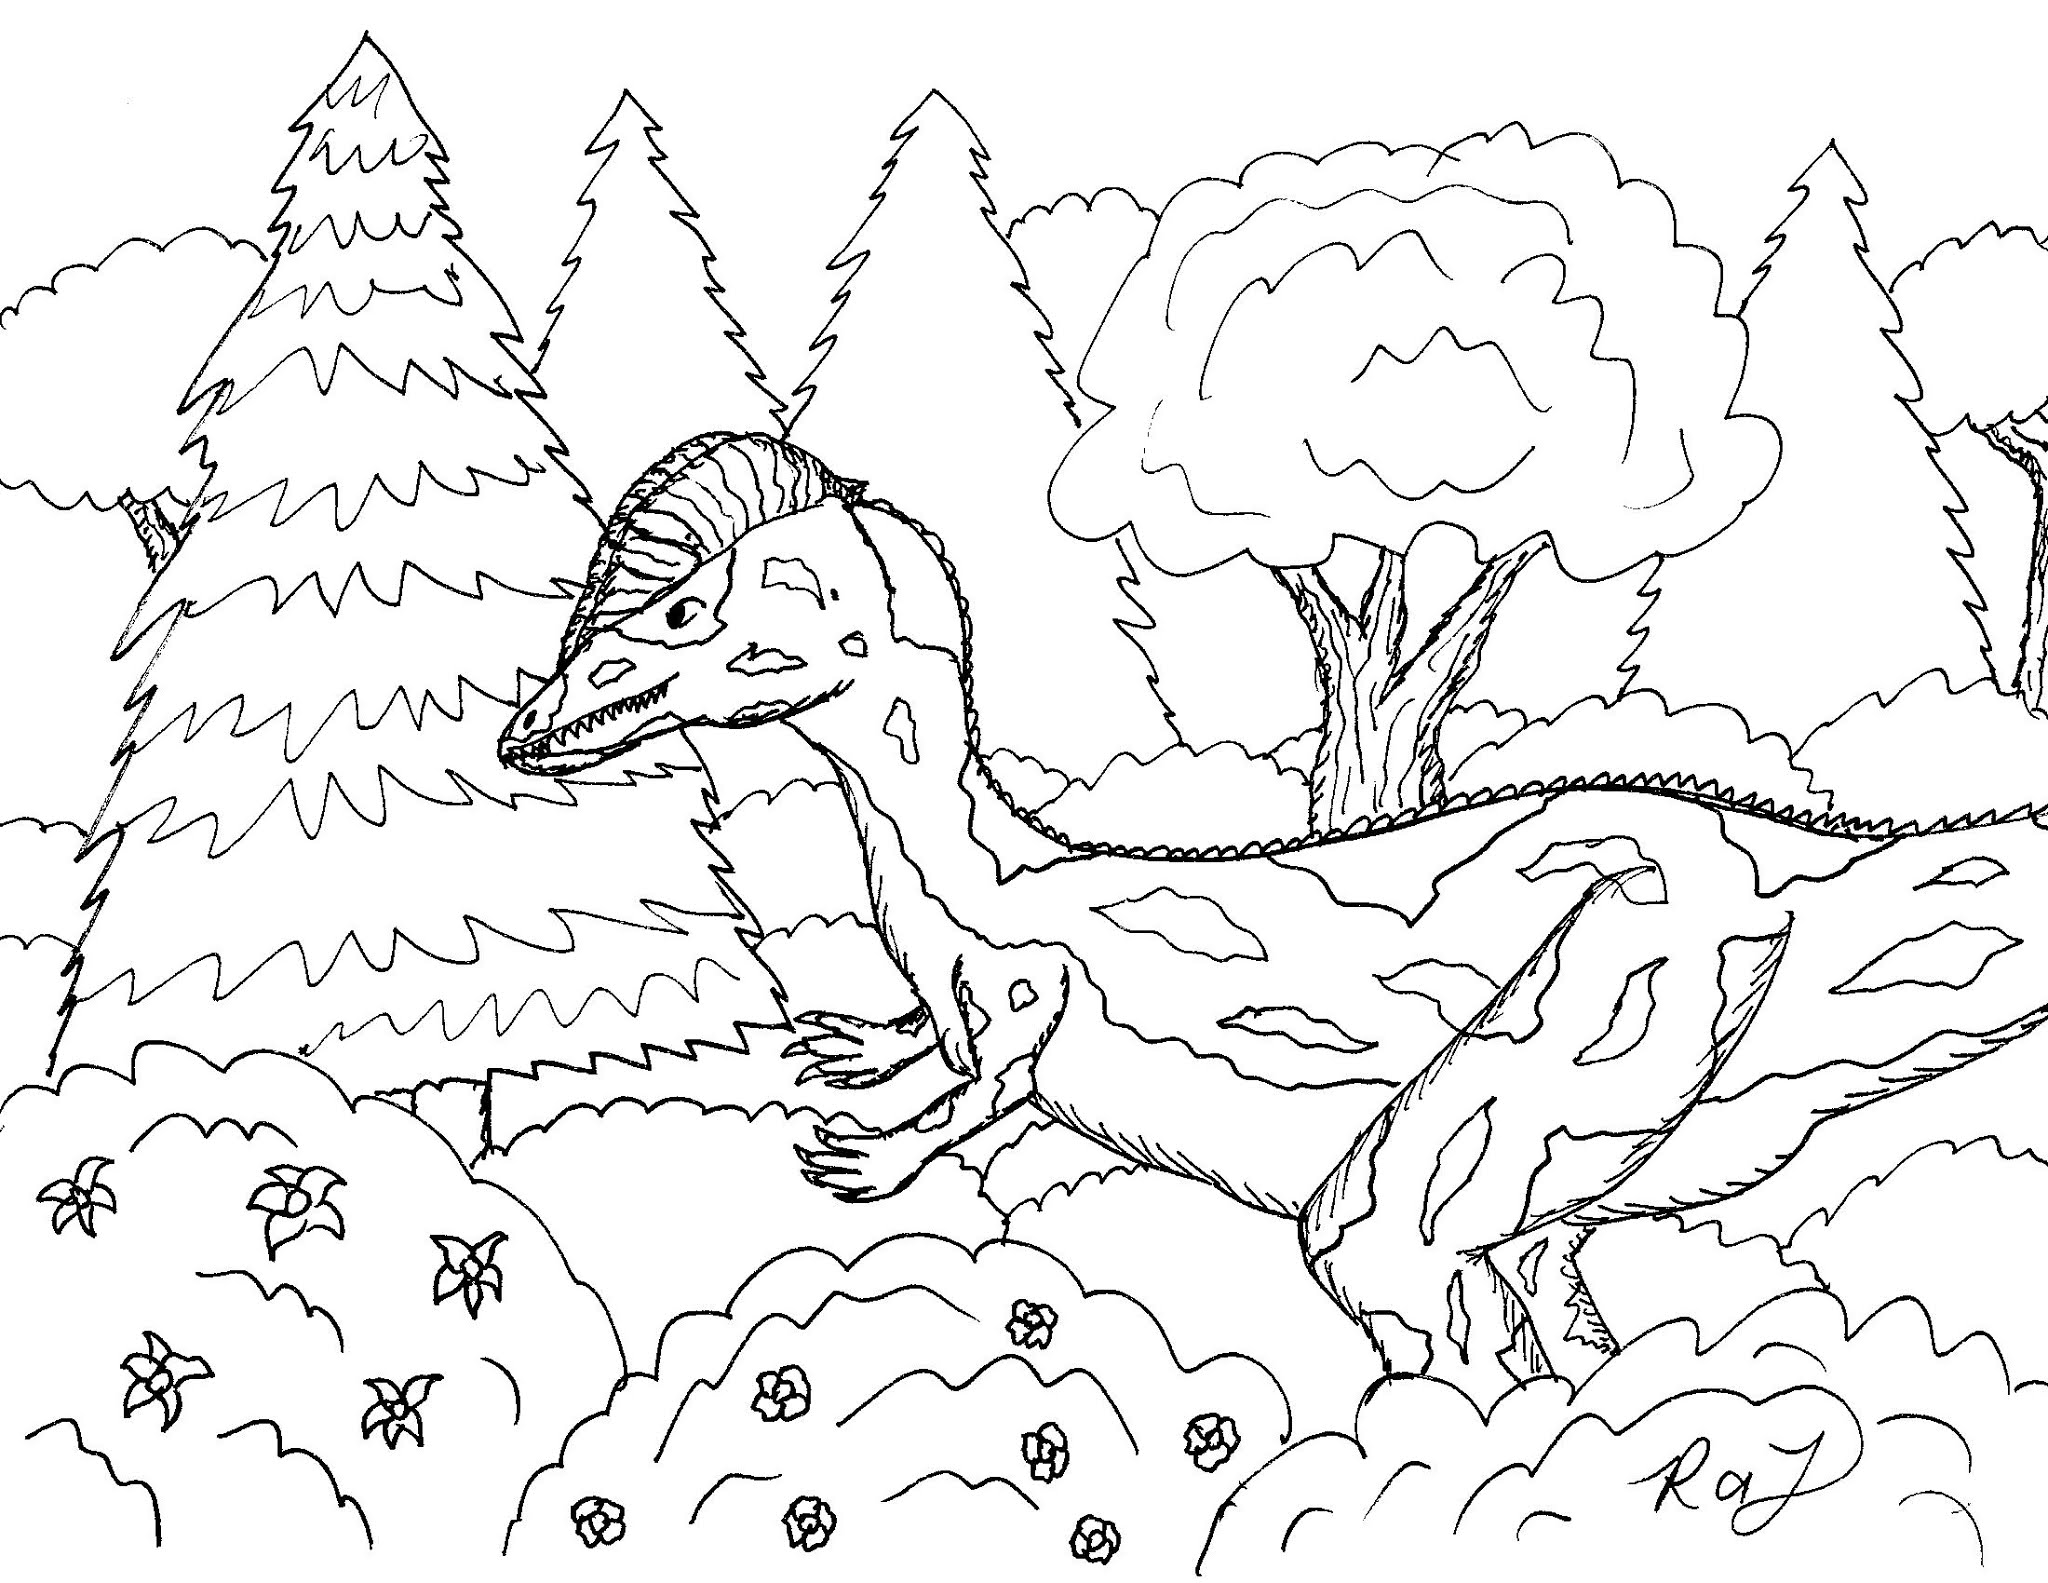 dilophosaurus coloring pages for kids